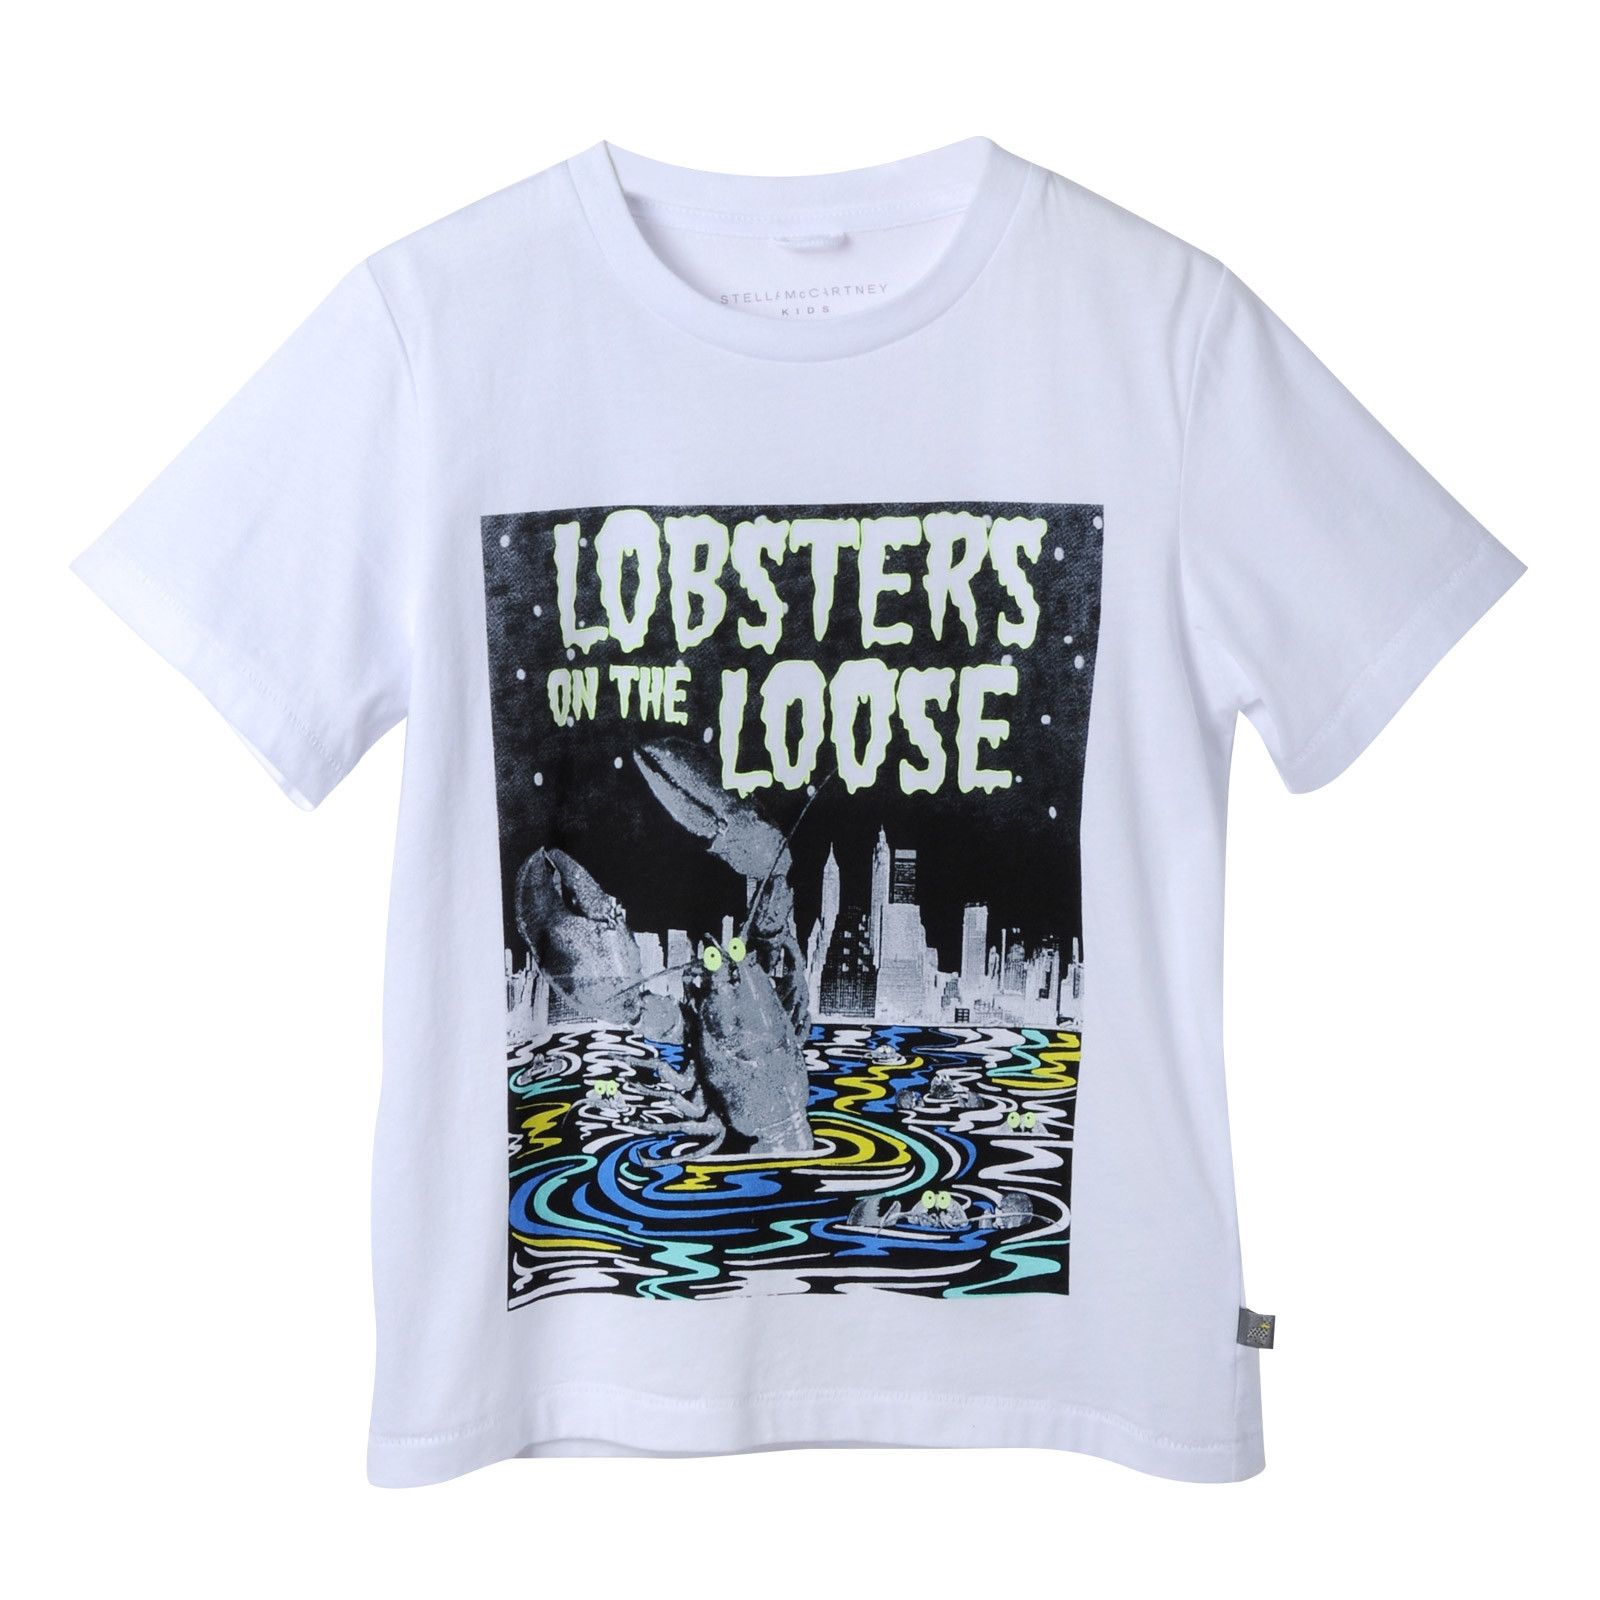 Boys White Cotton T-Shirt With Lobster On The Loose Print - CÉMAROSE | Children's Fashion Store